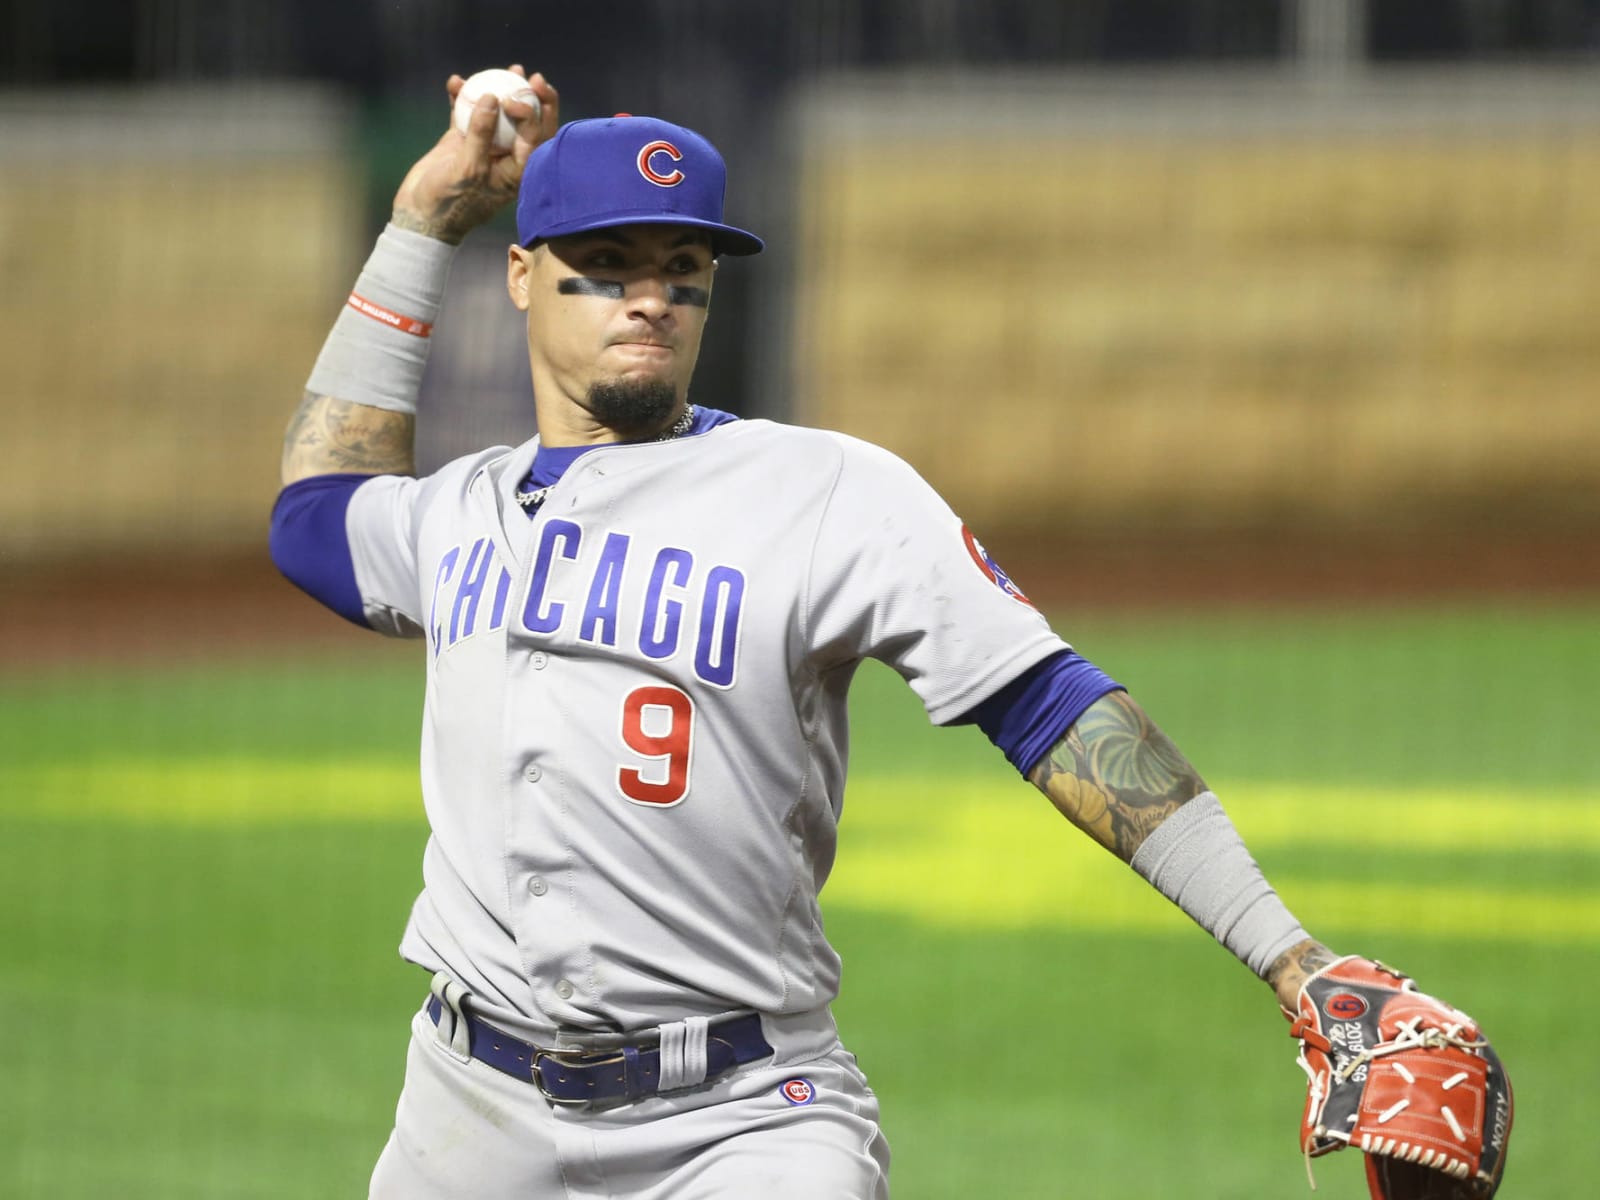 Let's celebrate Javier Baez's 25th birthday with some of our